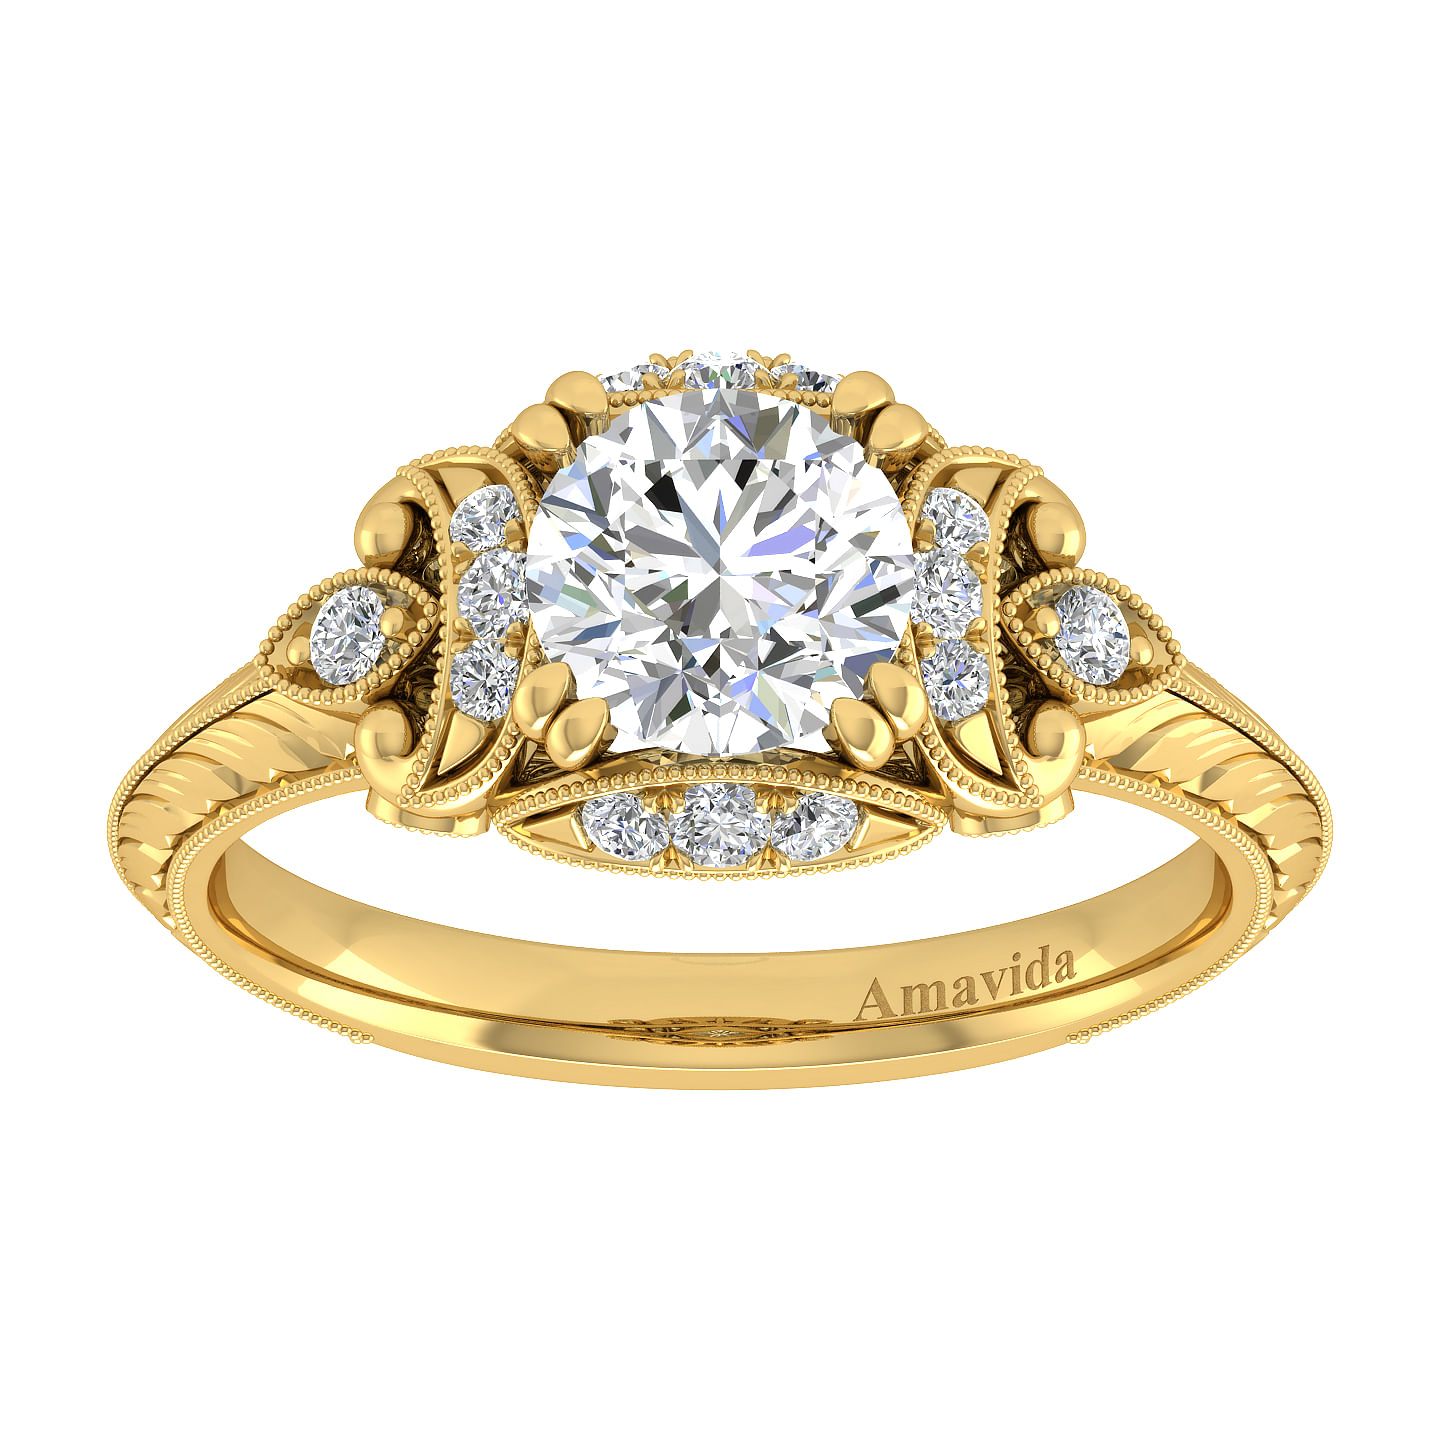 Unique 18K Yellow Gold Vintage Inspired Diamond Halo Engagement Ring